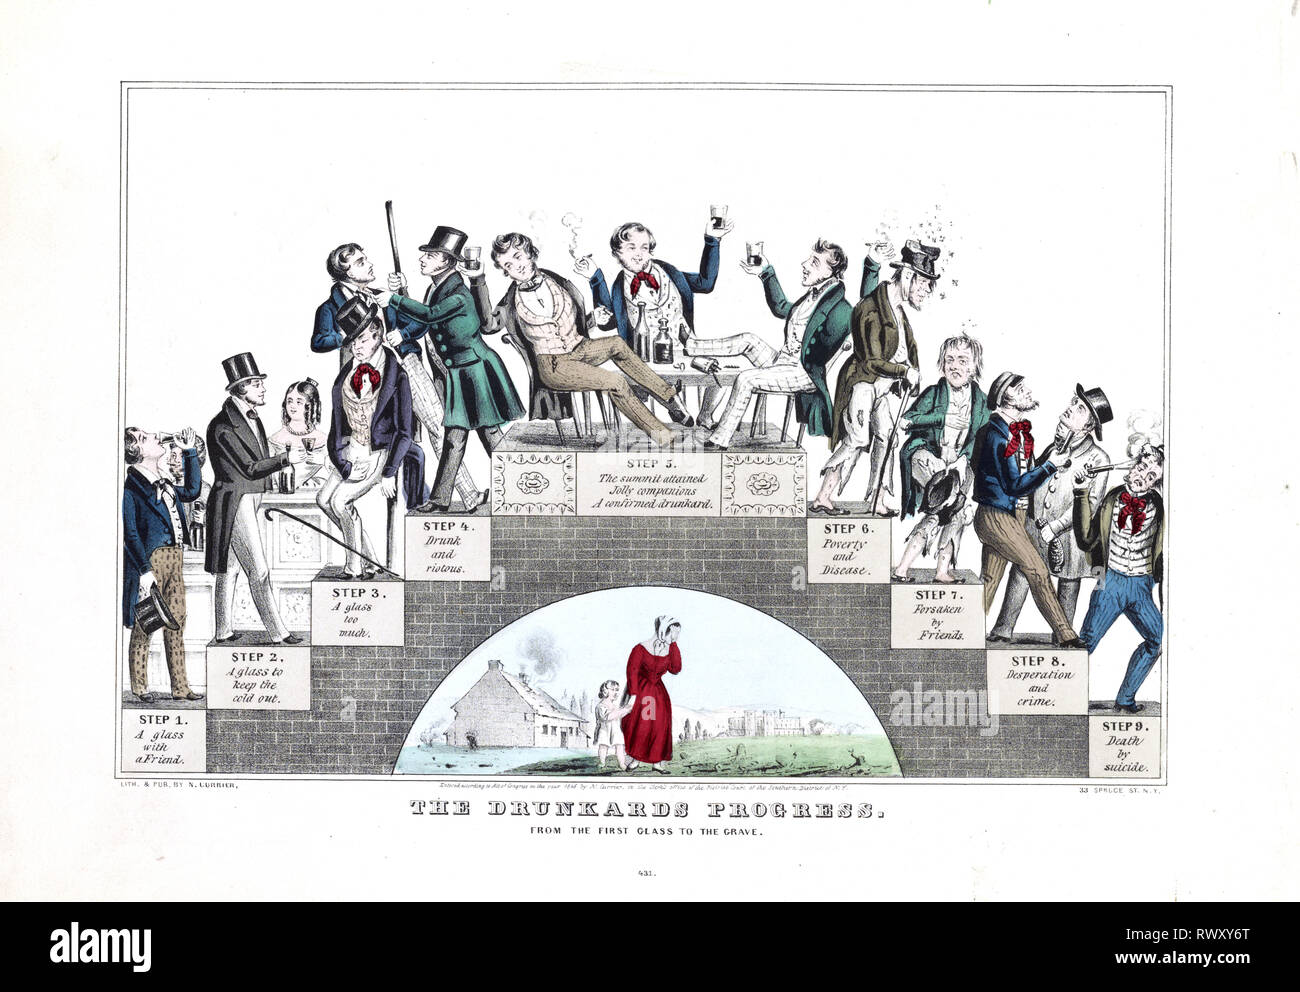 Print shows an archway of the nine steps of a drunkard's progress, beginning with a man in fancy dress having 'a glass with a friend' and then his gradual decline in society with poverty & disease, criminal activity, becoming a bum, and his eventual 'death by suicide'; a weeping woman with child is under archway. Stock Photo